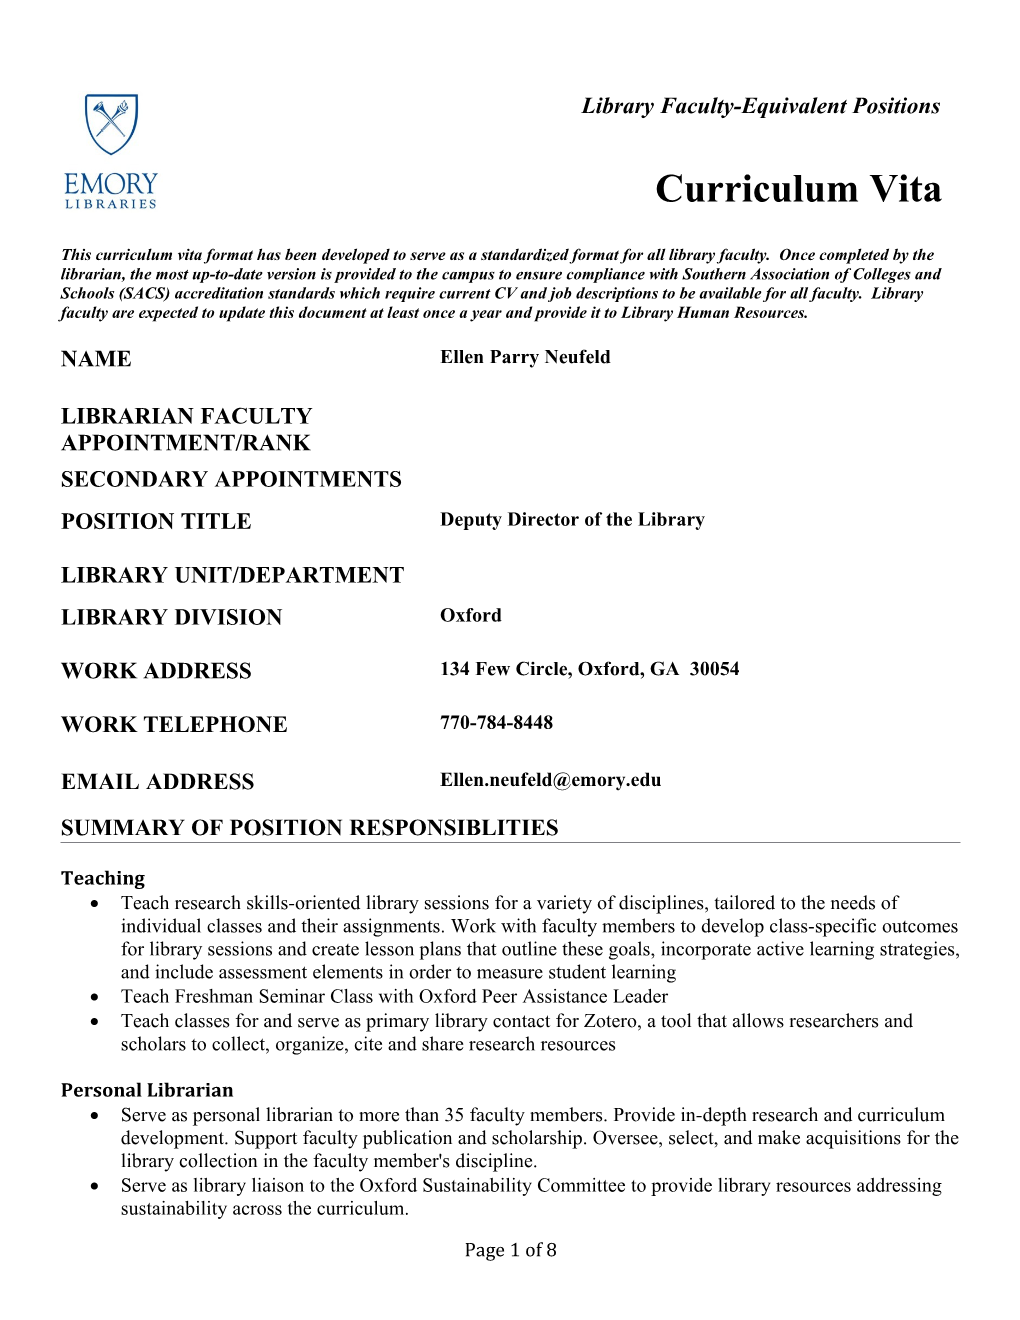 This Curriculum Vita Format Has Been Developed to Serve As a Standardized Format for All